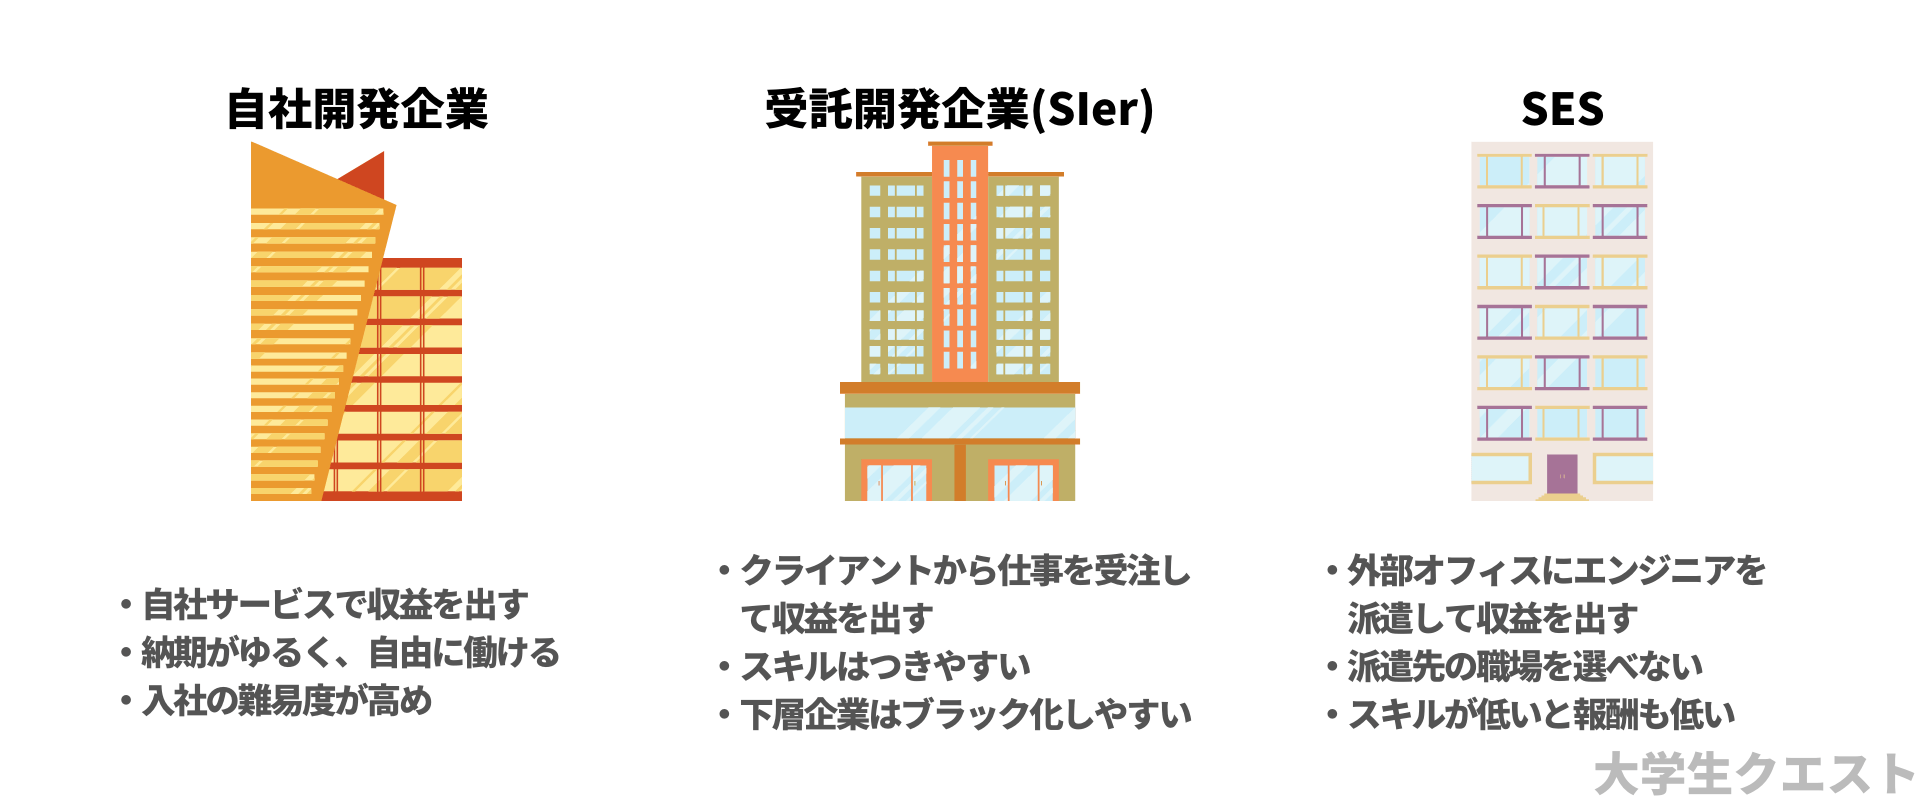 IT企業の種類